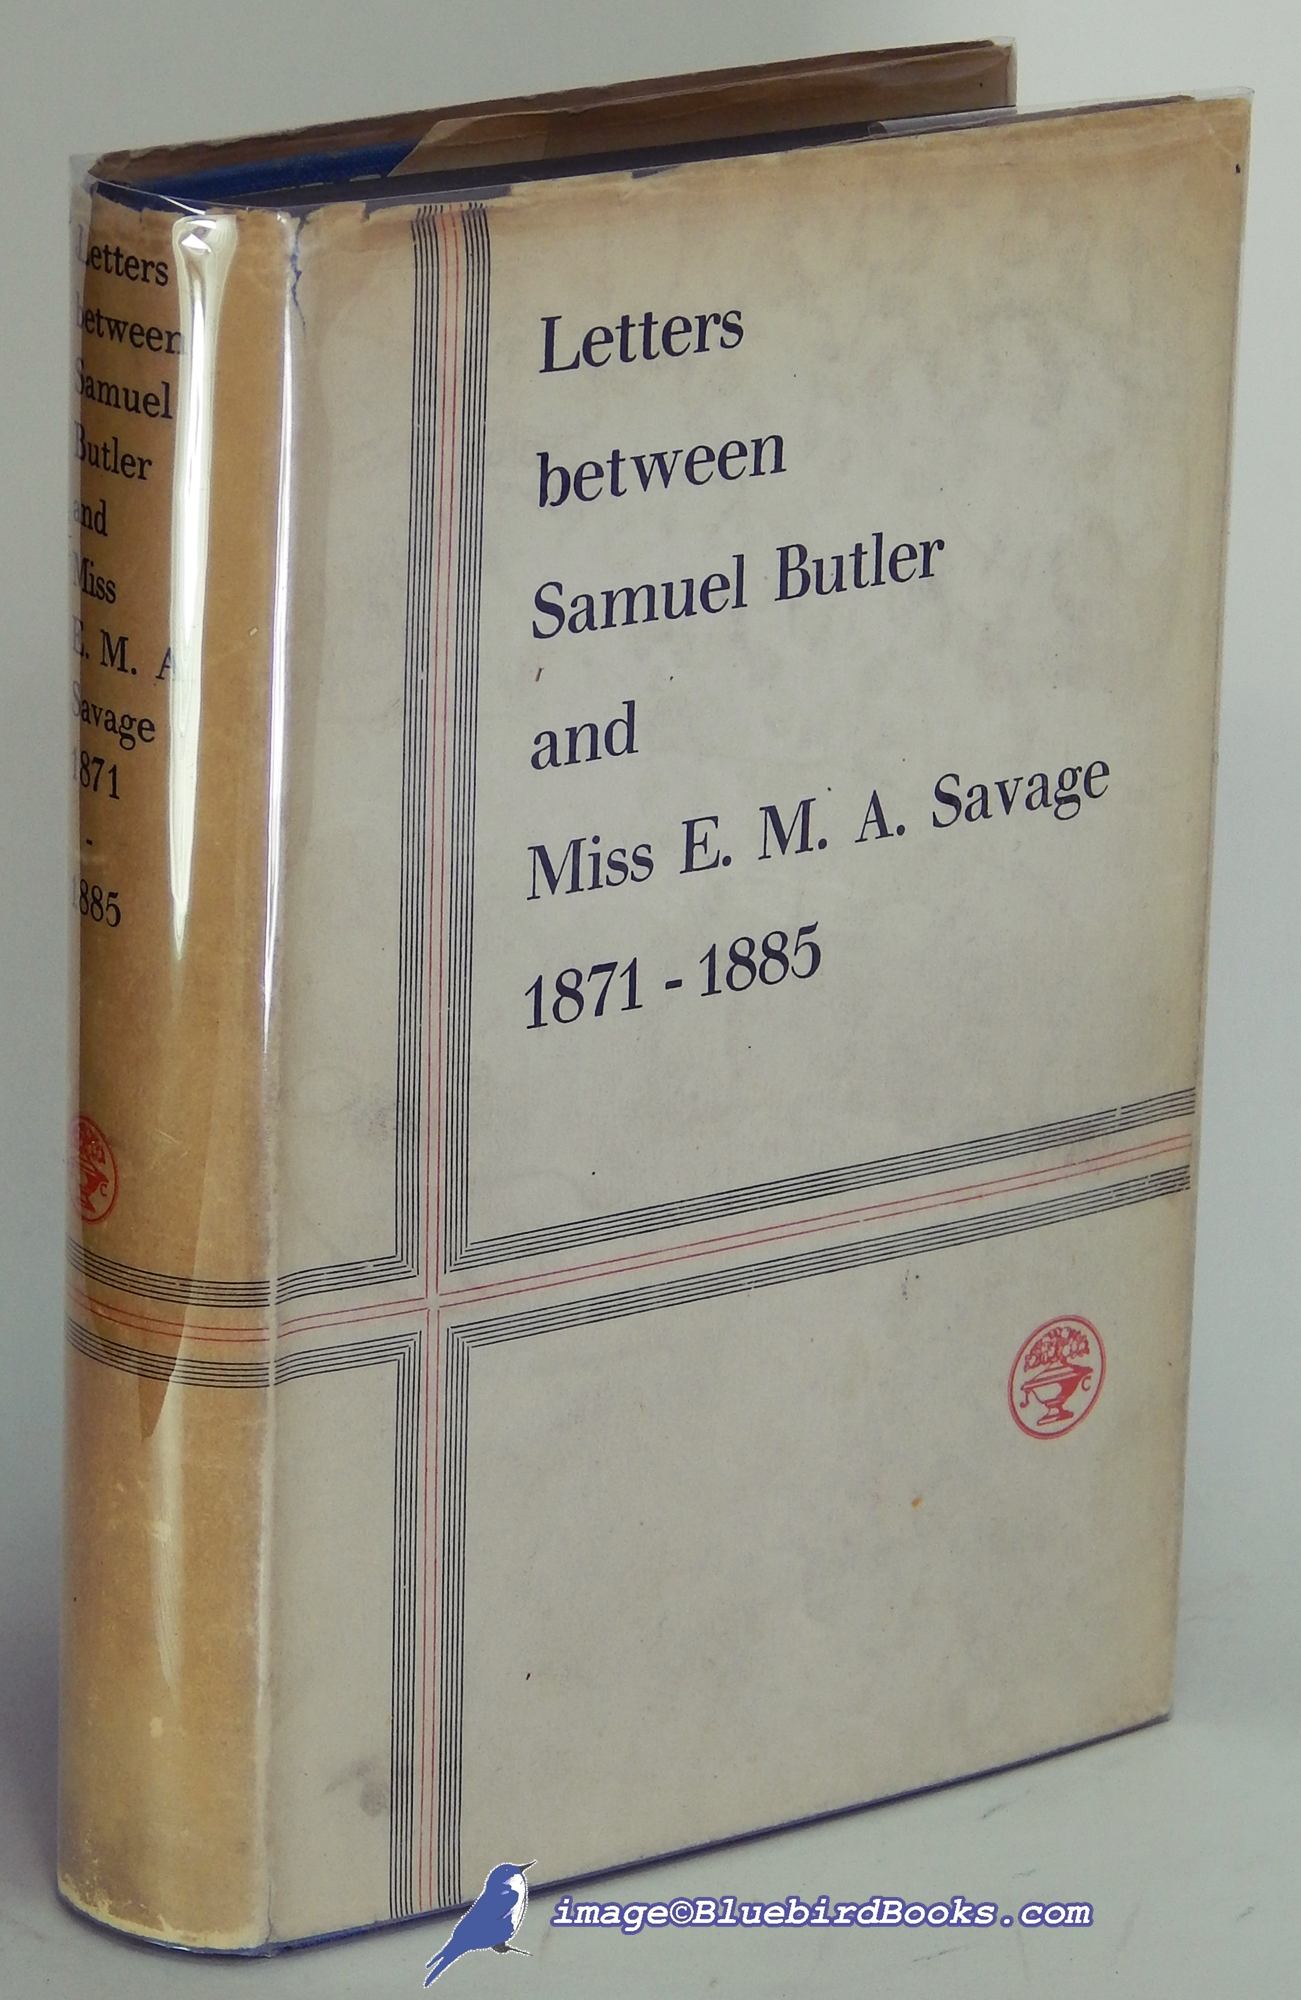 Image for Letters between Samuel Butler and Miss E. M. A. Savage, 1871-1885